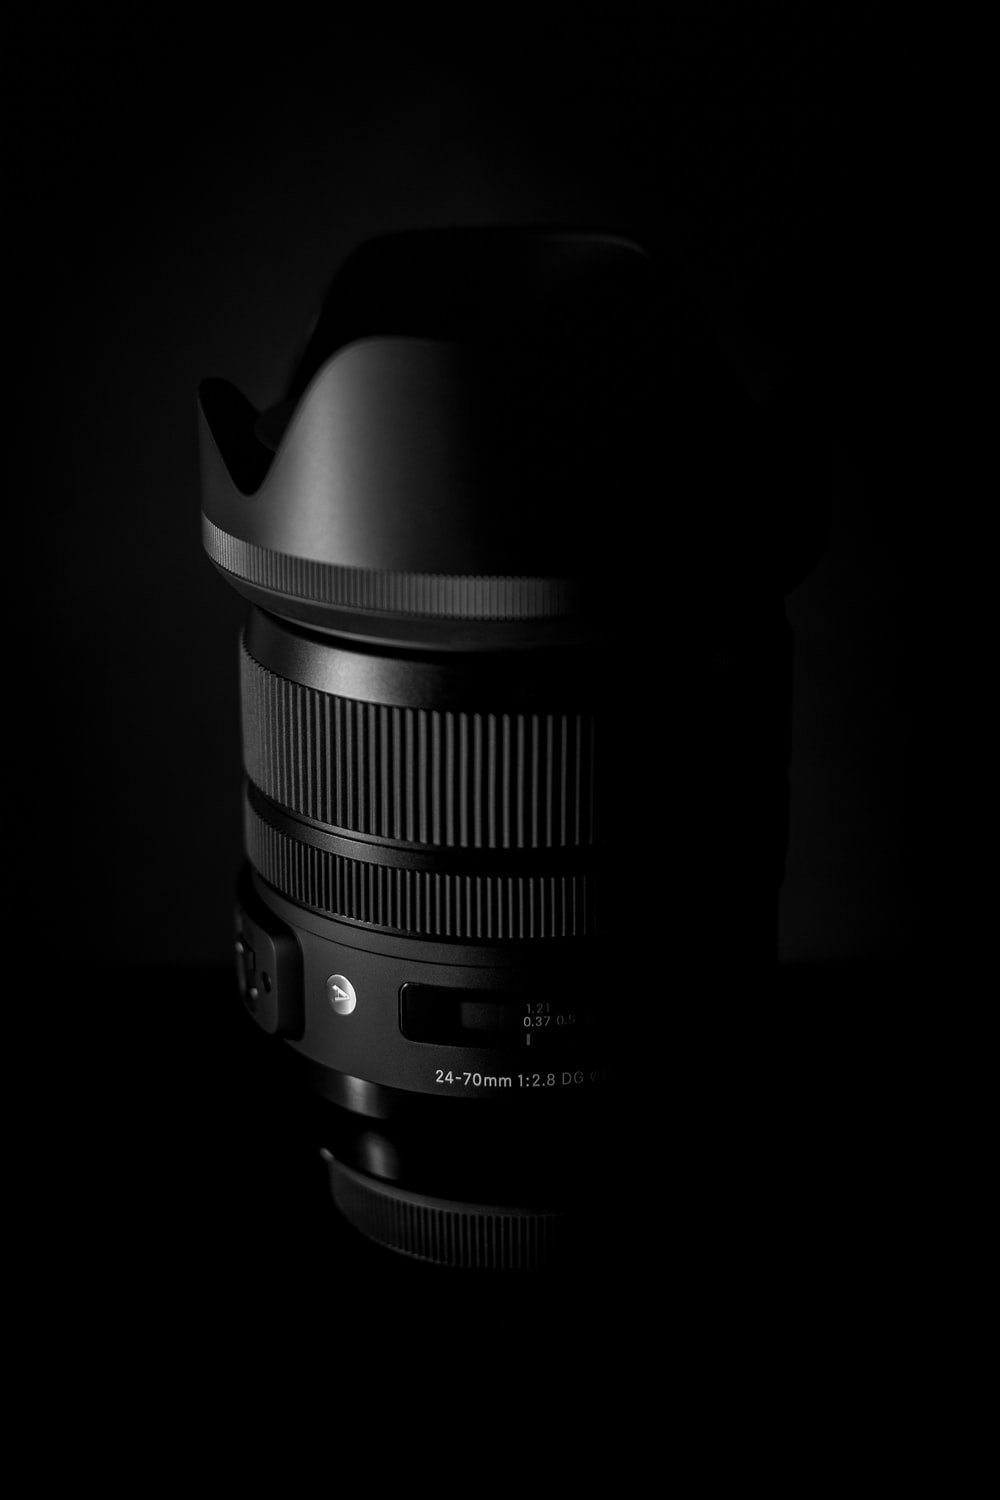 Canon Lens Picture. Download Free Image